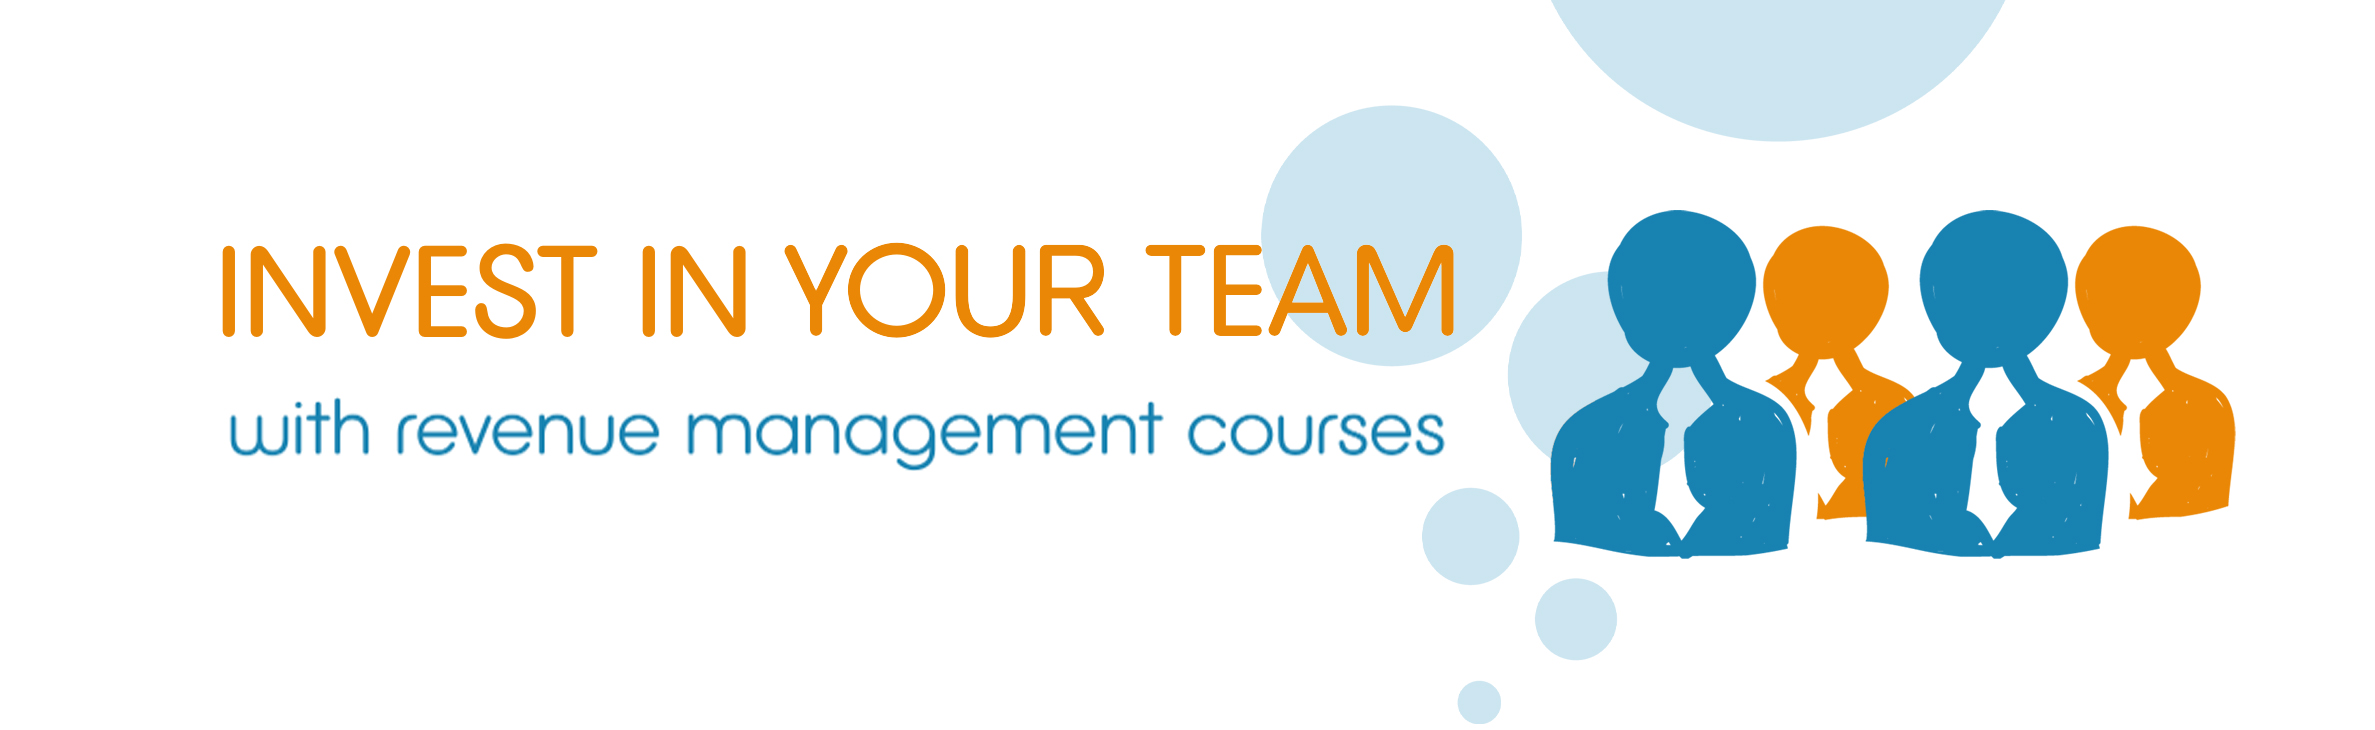 Invest in your team with revenue management courses